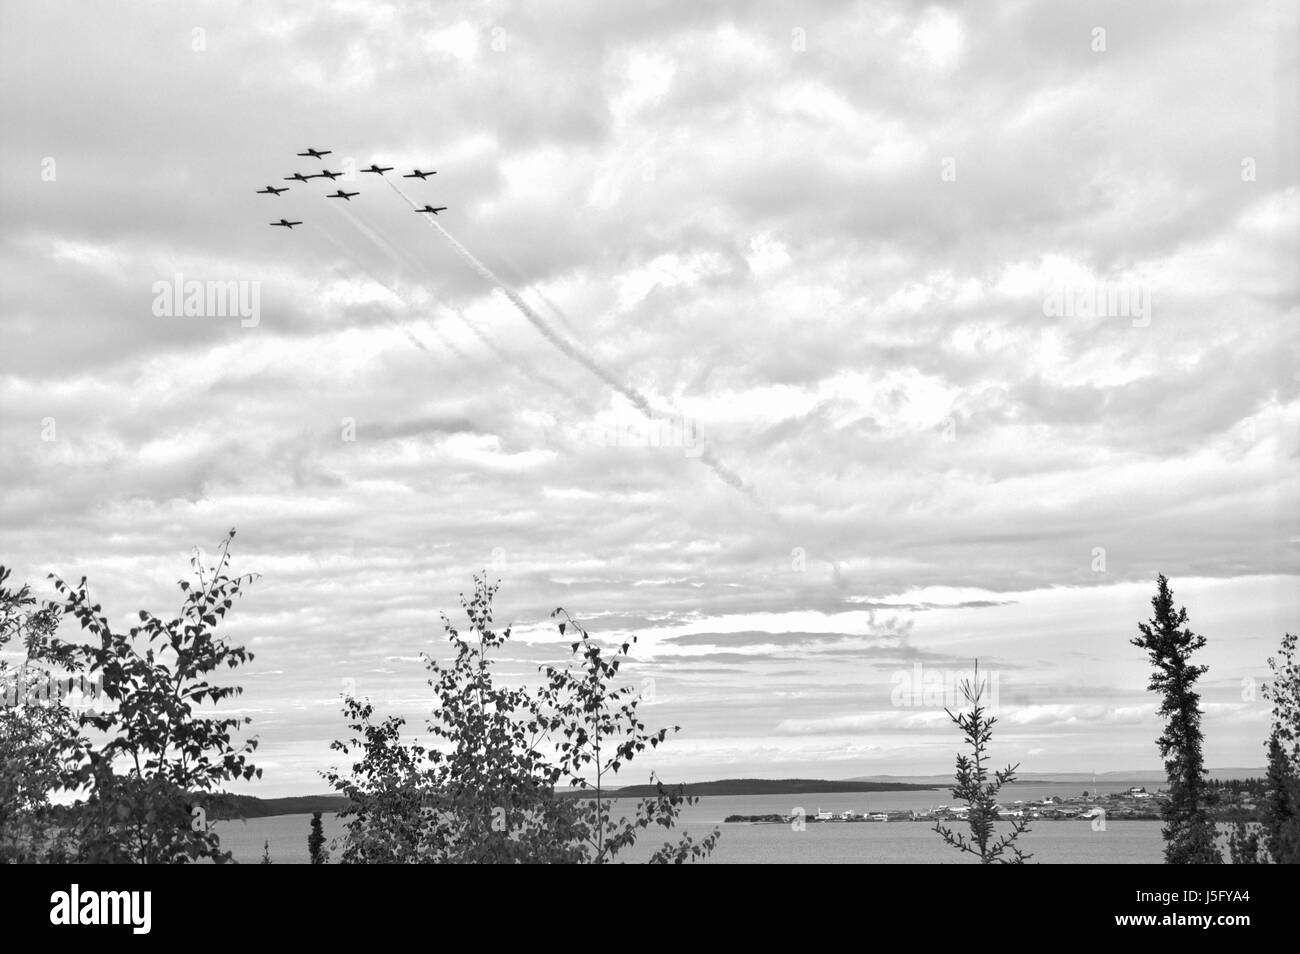 The Snowbirds putting on a demonstration over Lutsel K'e , NWT, Northwest Territories, Canada Stock Photo